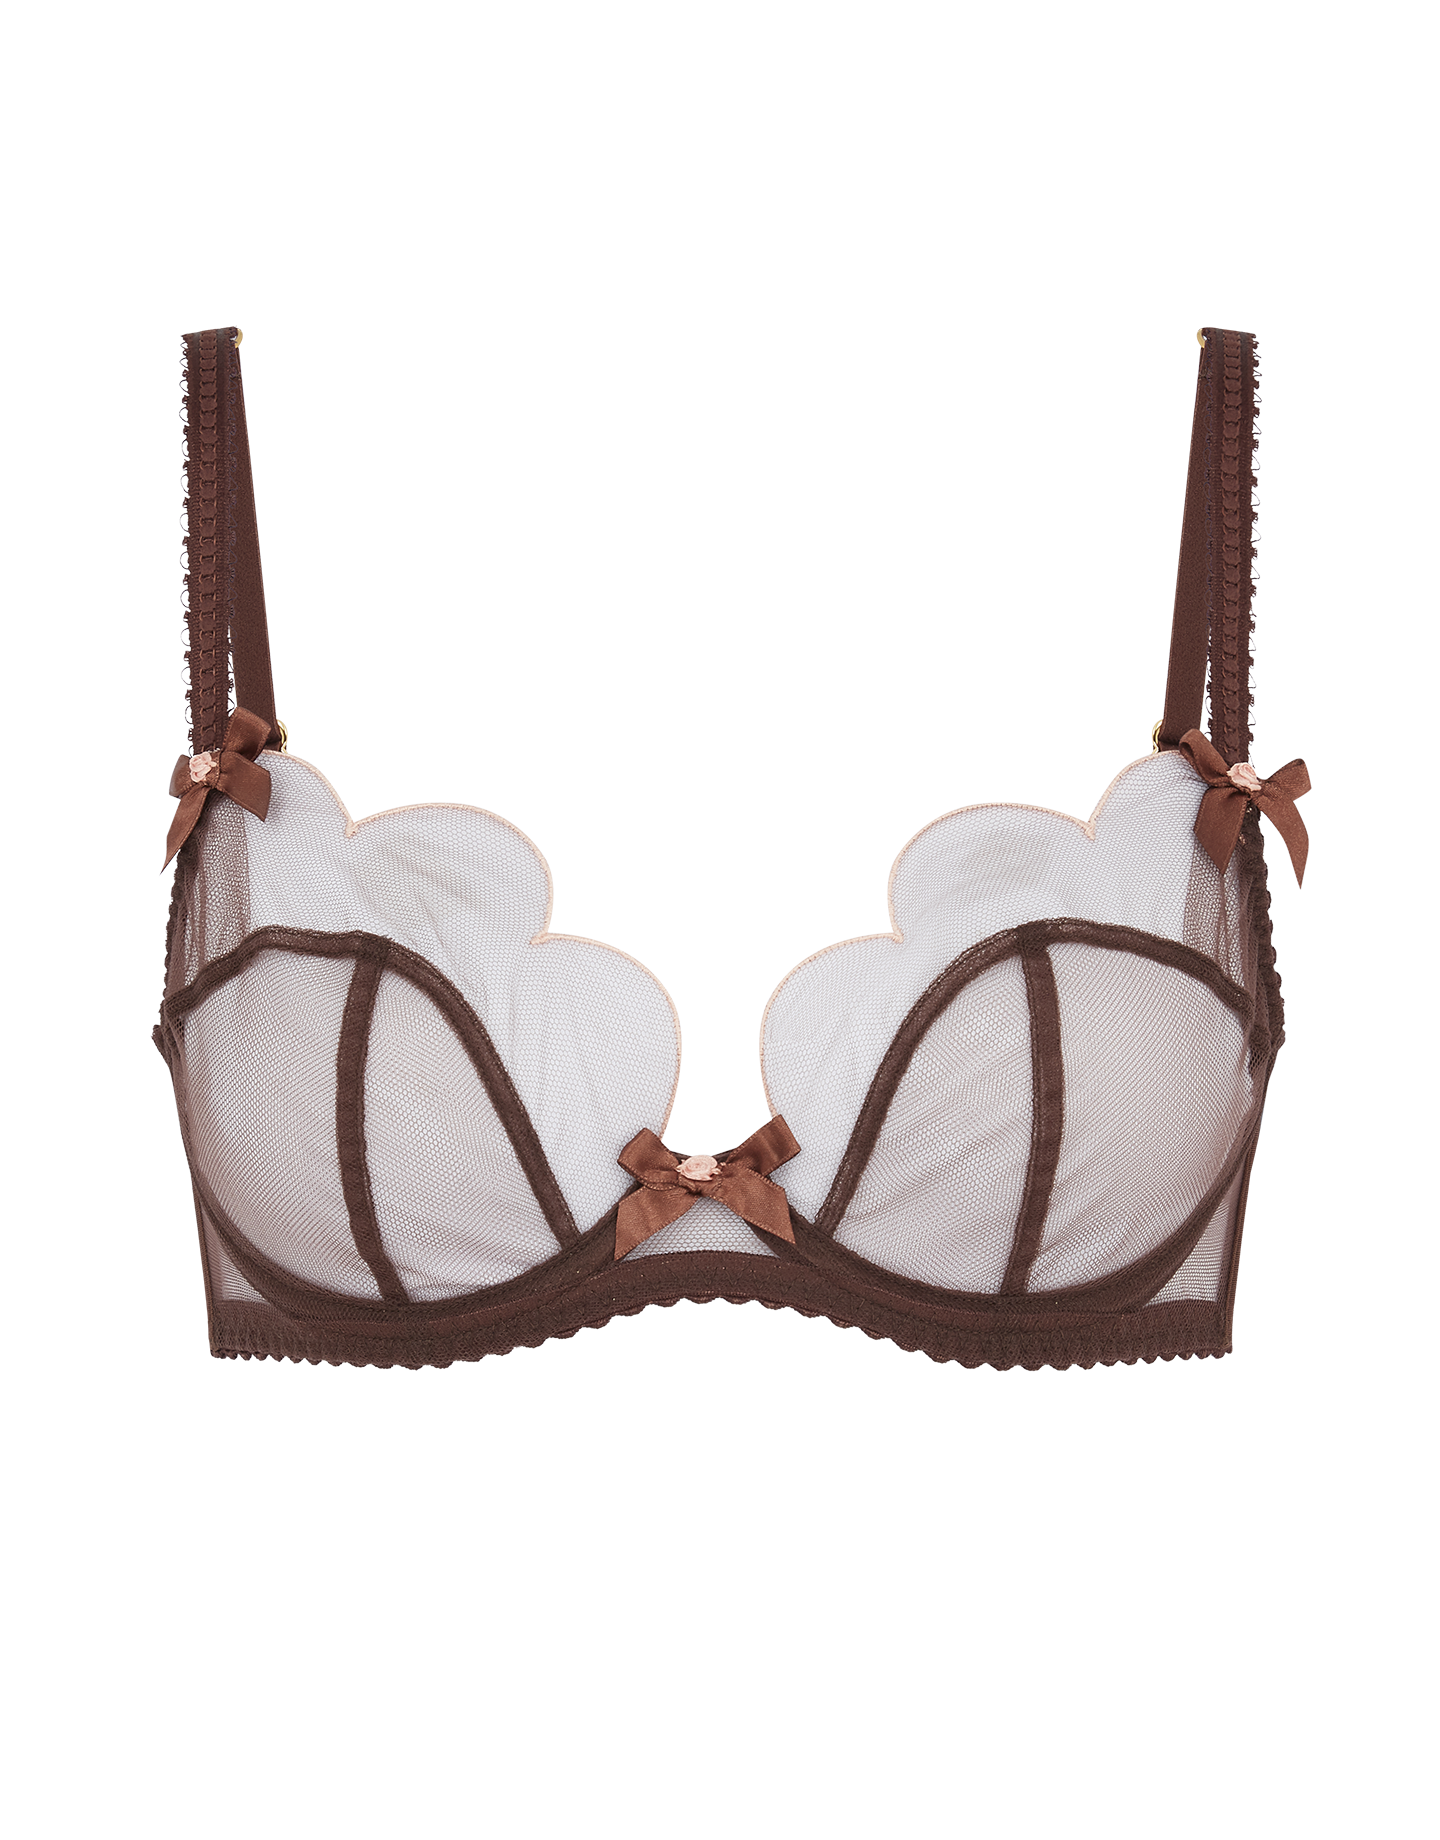 Lorna Plunge Underwired Bra in Chestnut | Agent Provocateur All Lingerie